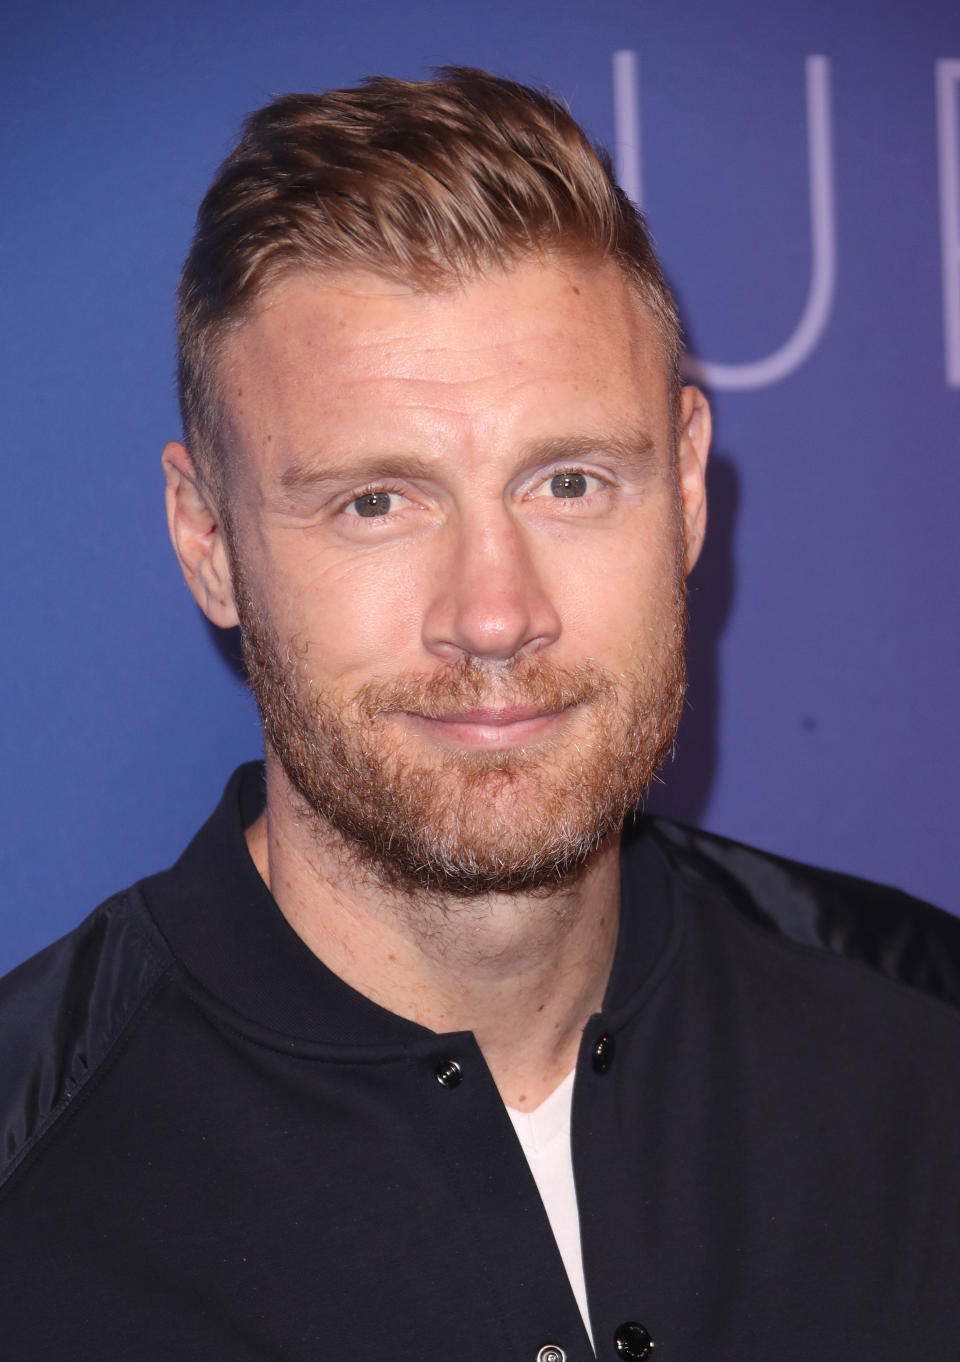 Freddie Flintoff has opened up about his experiences of having bulimia, pictured in 2020 in London. (Getty Images)